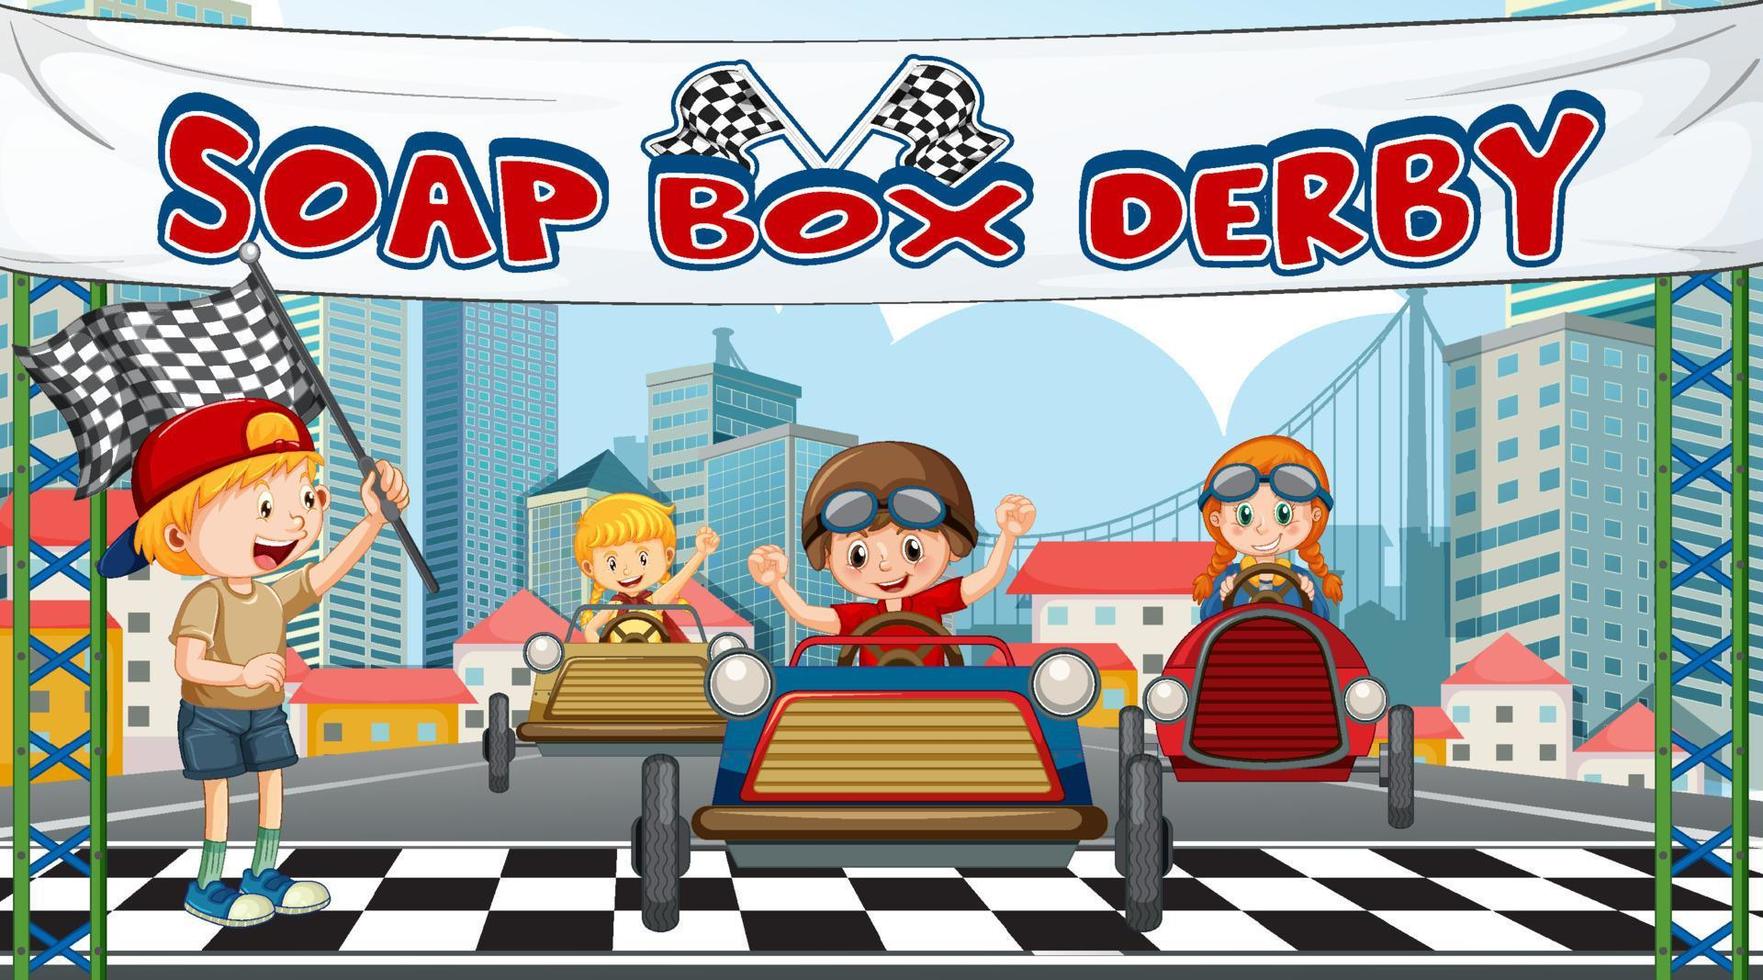 Soap box derby scene with children racing car vector